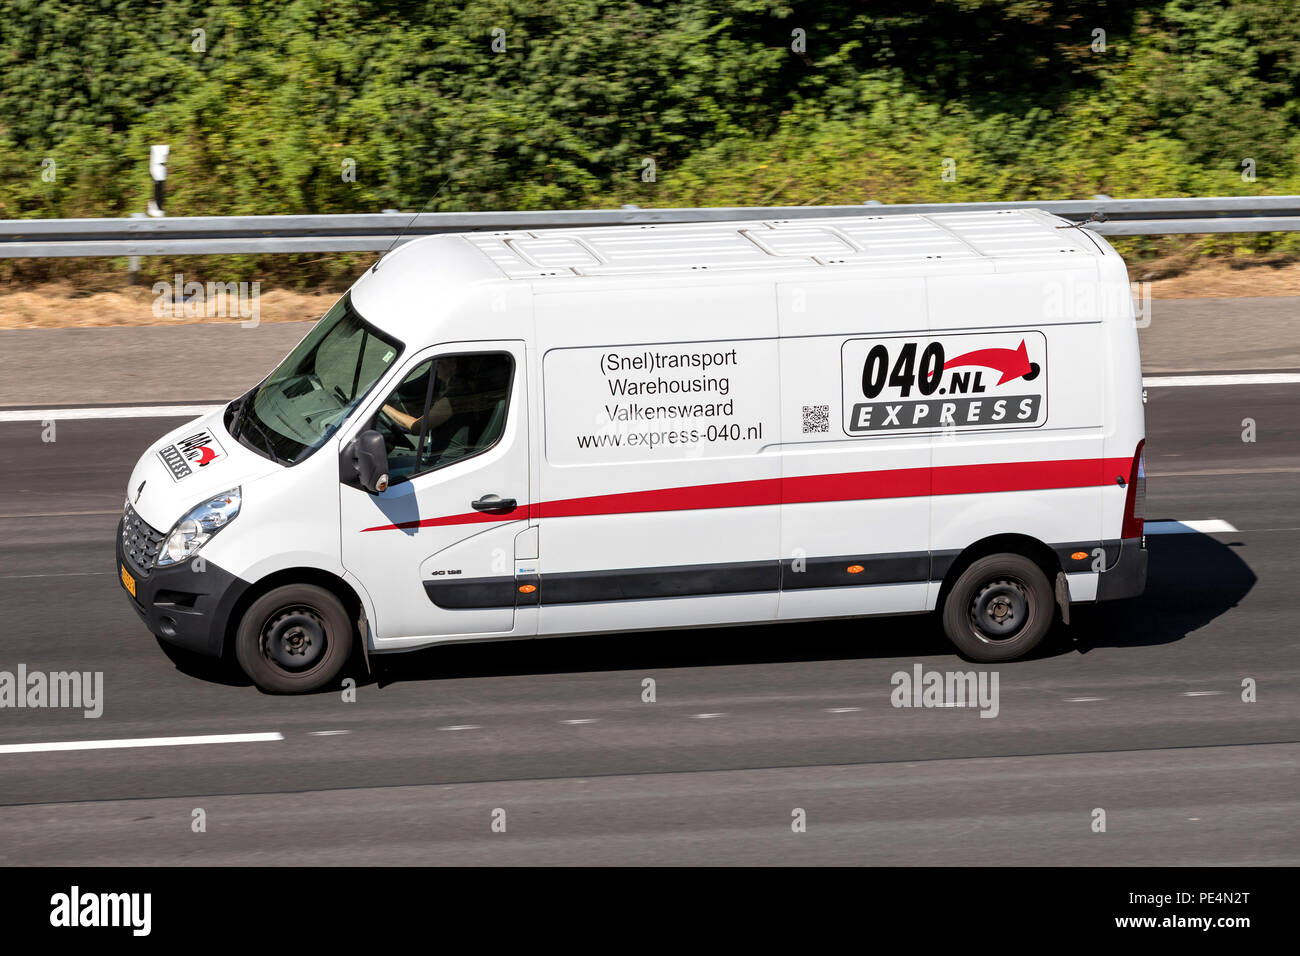 Express-040 van on motorway. Dutch Express-040 is specialized in fast transport and fixed return trips. Stock Photo